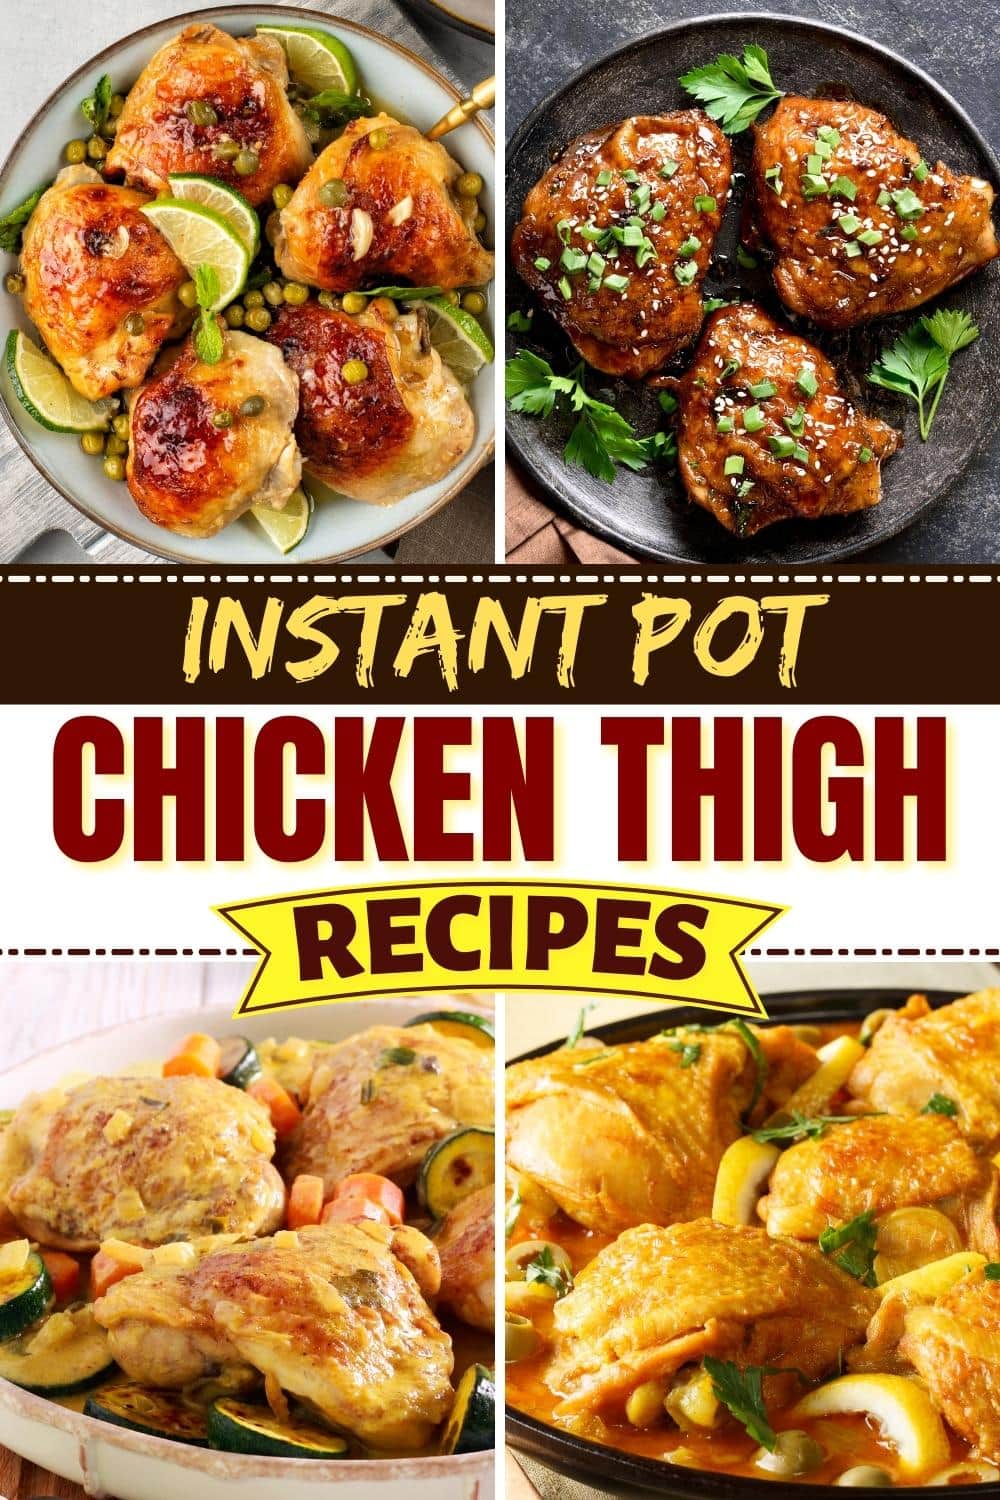 17 Best Instant Pot Chicken Thigh Recipes - Insanely Good